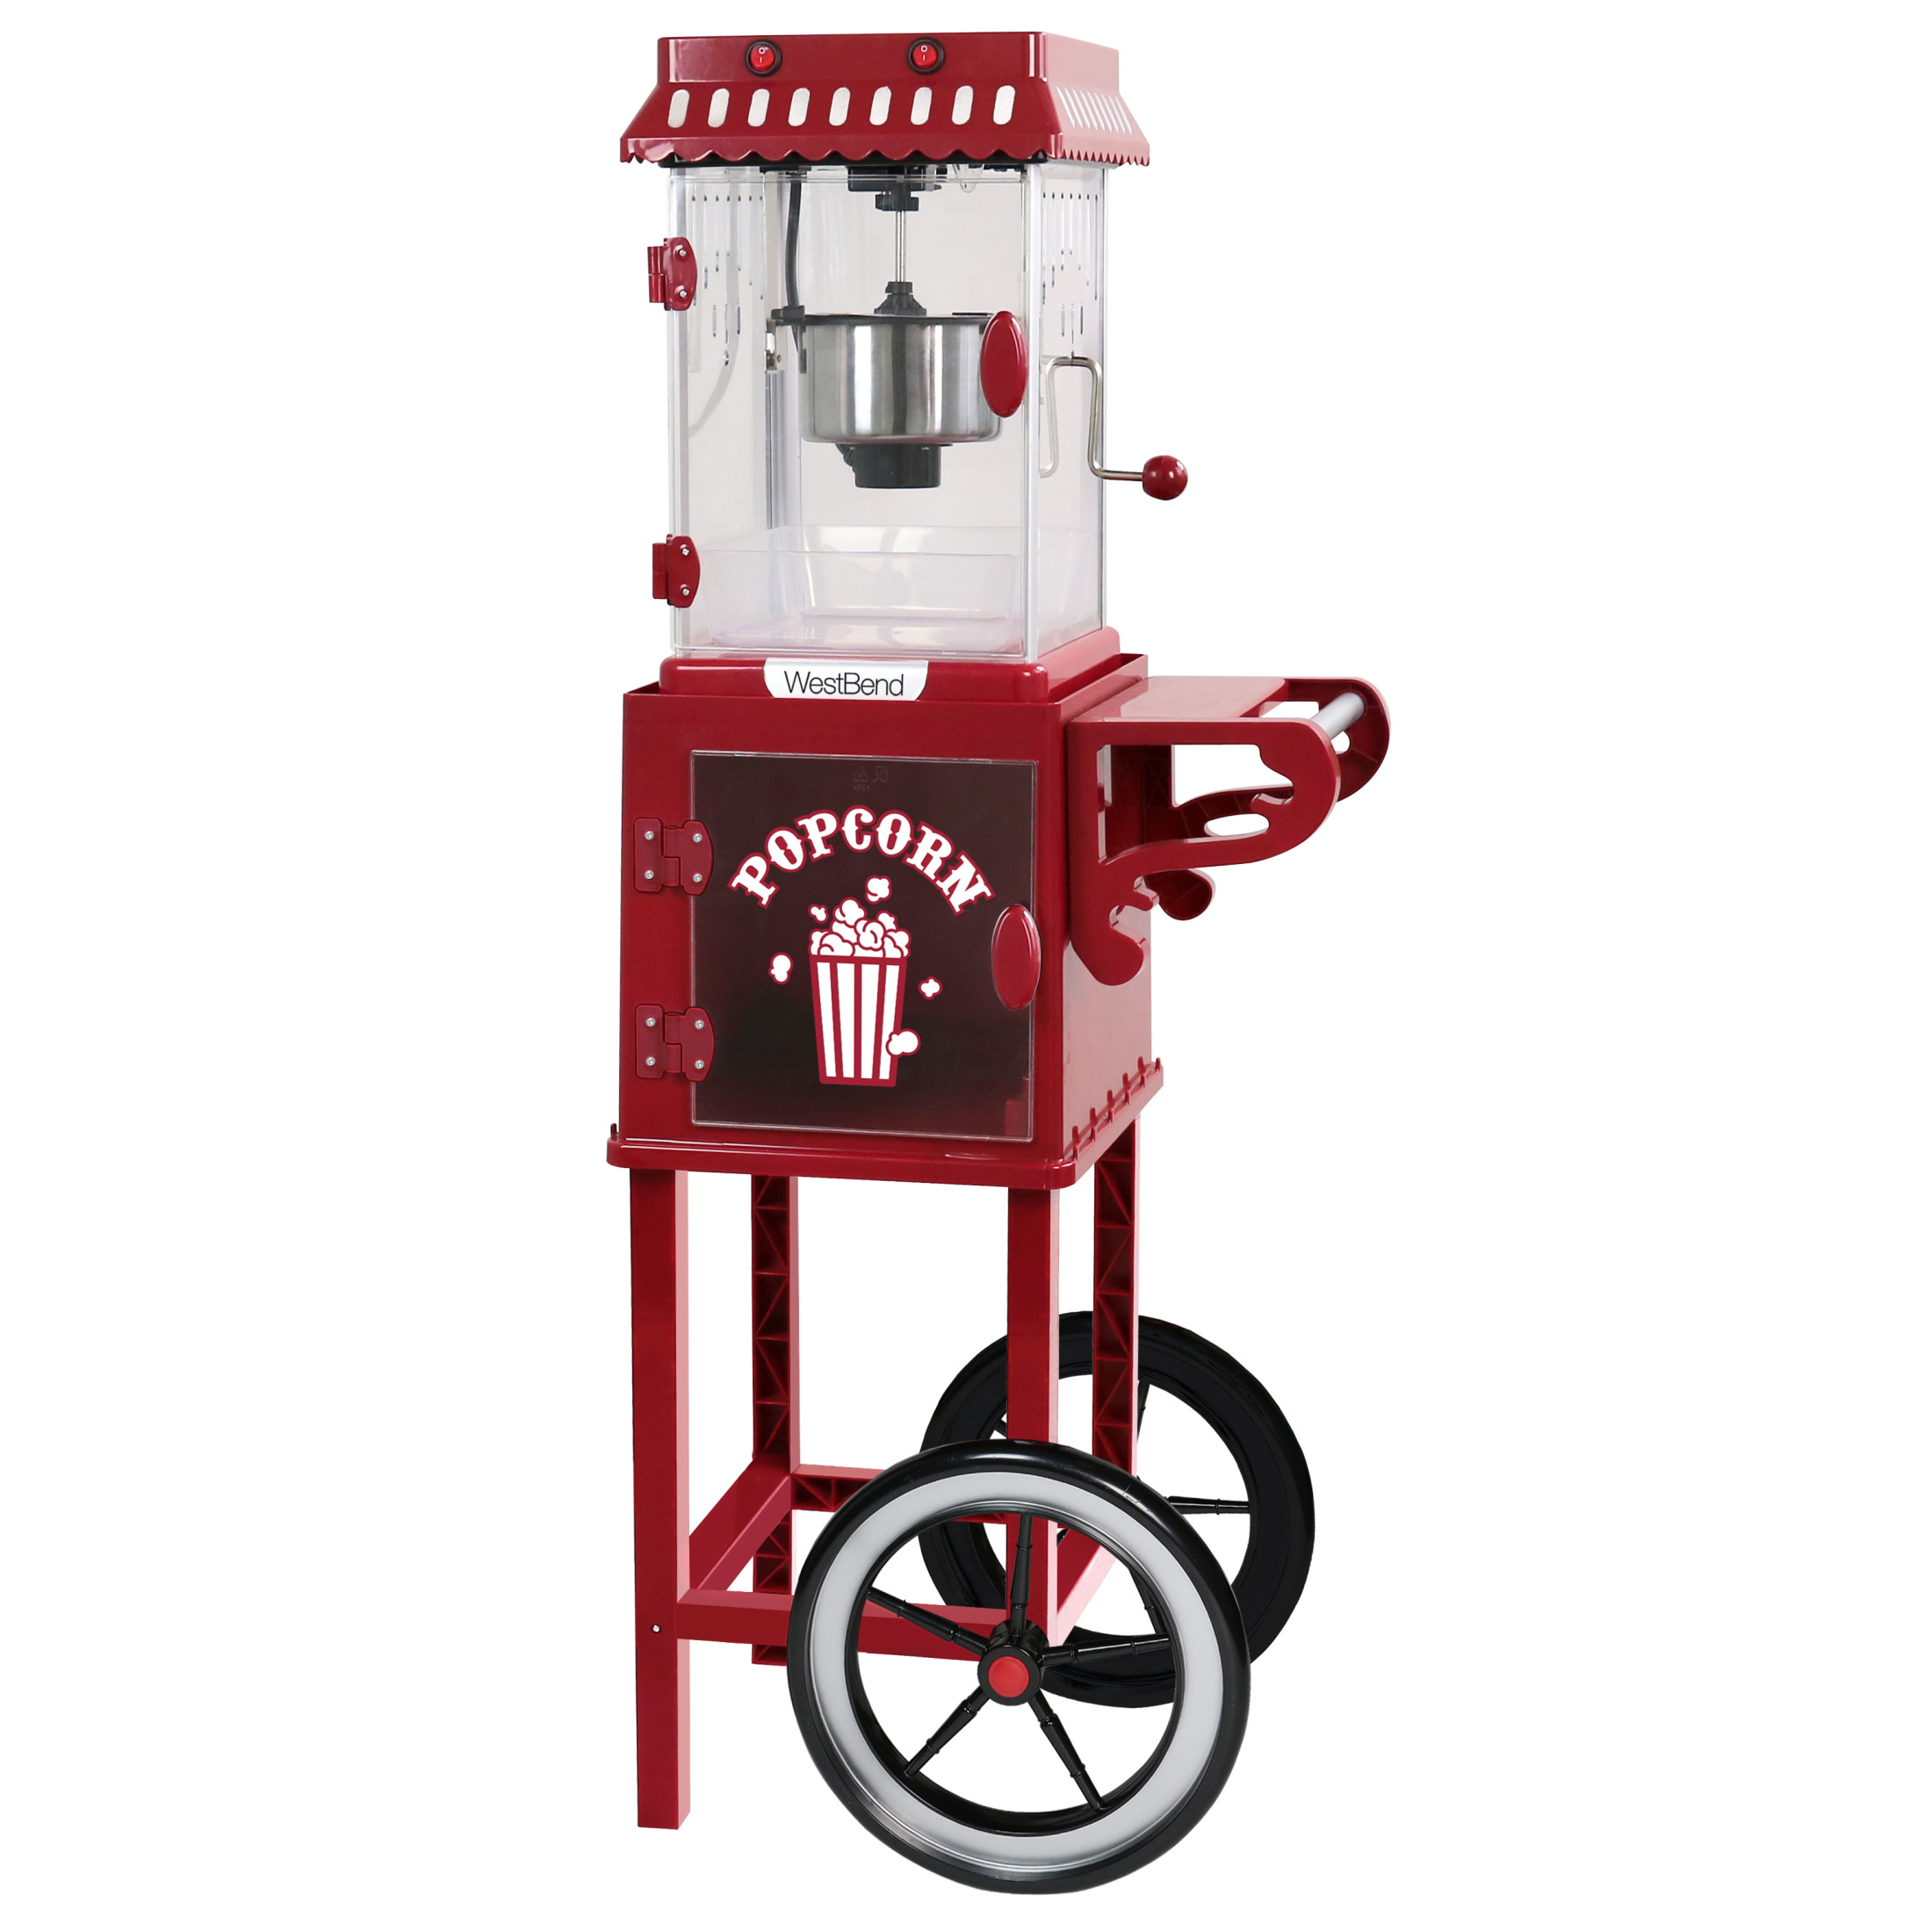 West Bend Popcorn Machine and Cart, 10-Cup Capacity, in Red (PCMC20RD13), 14.35 lb., New - image 1 of 6